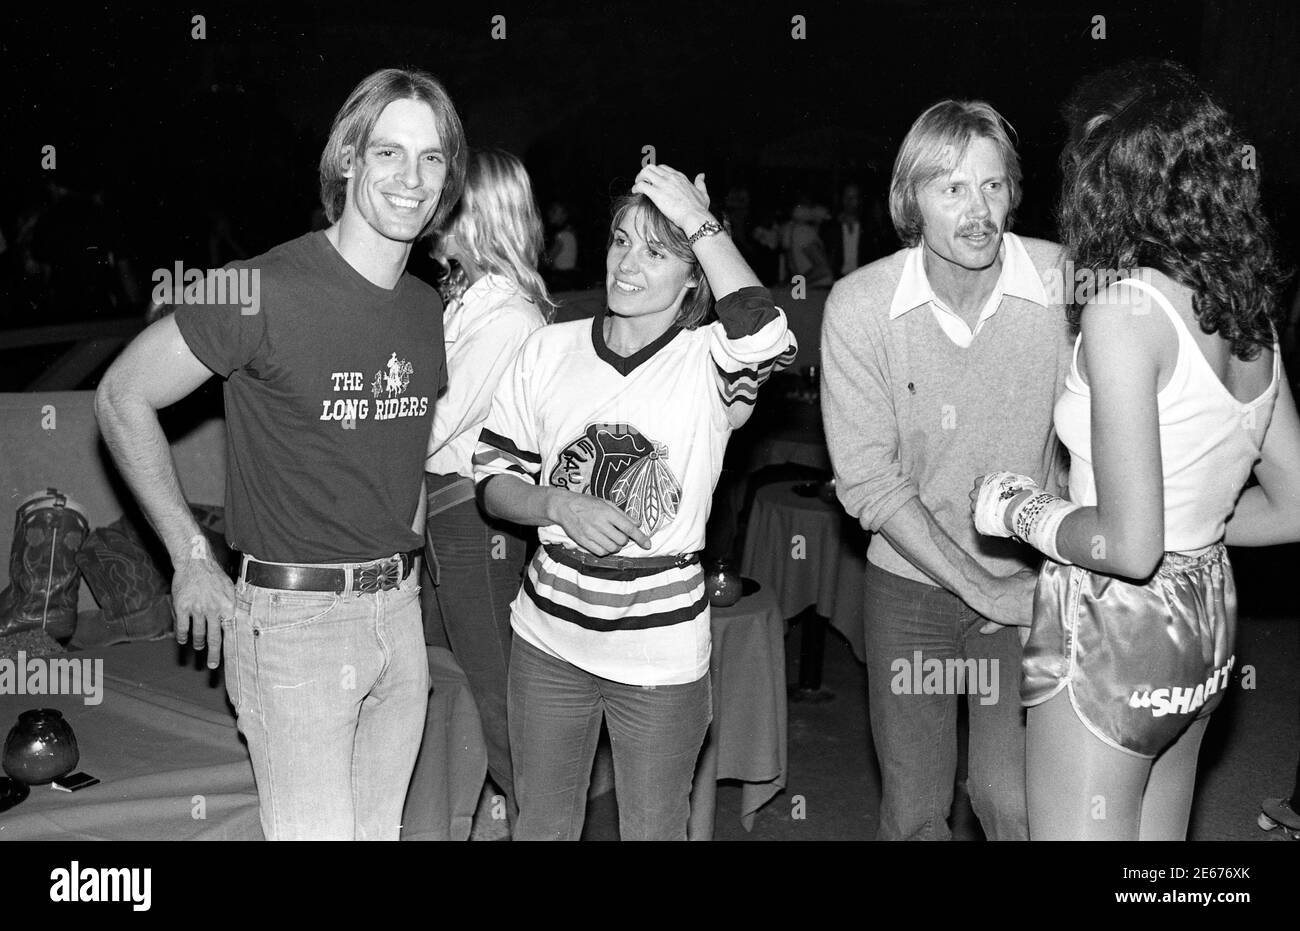 Keith Carradine, Susan St. James and Jon Voigt at  Roller Rink  for event in support of ERA, Los Angeles, ,Ca circa 1970s. Stock Photo